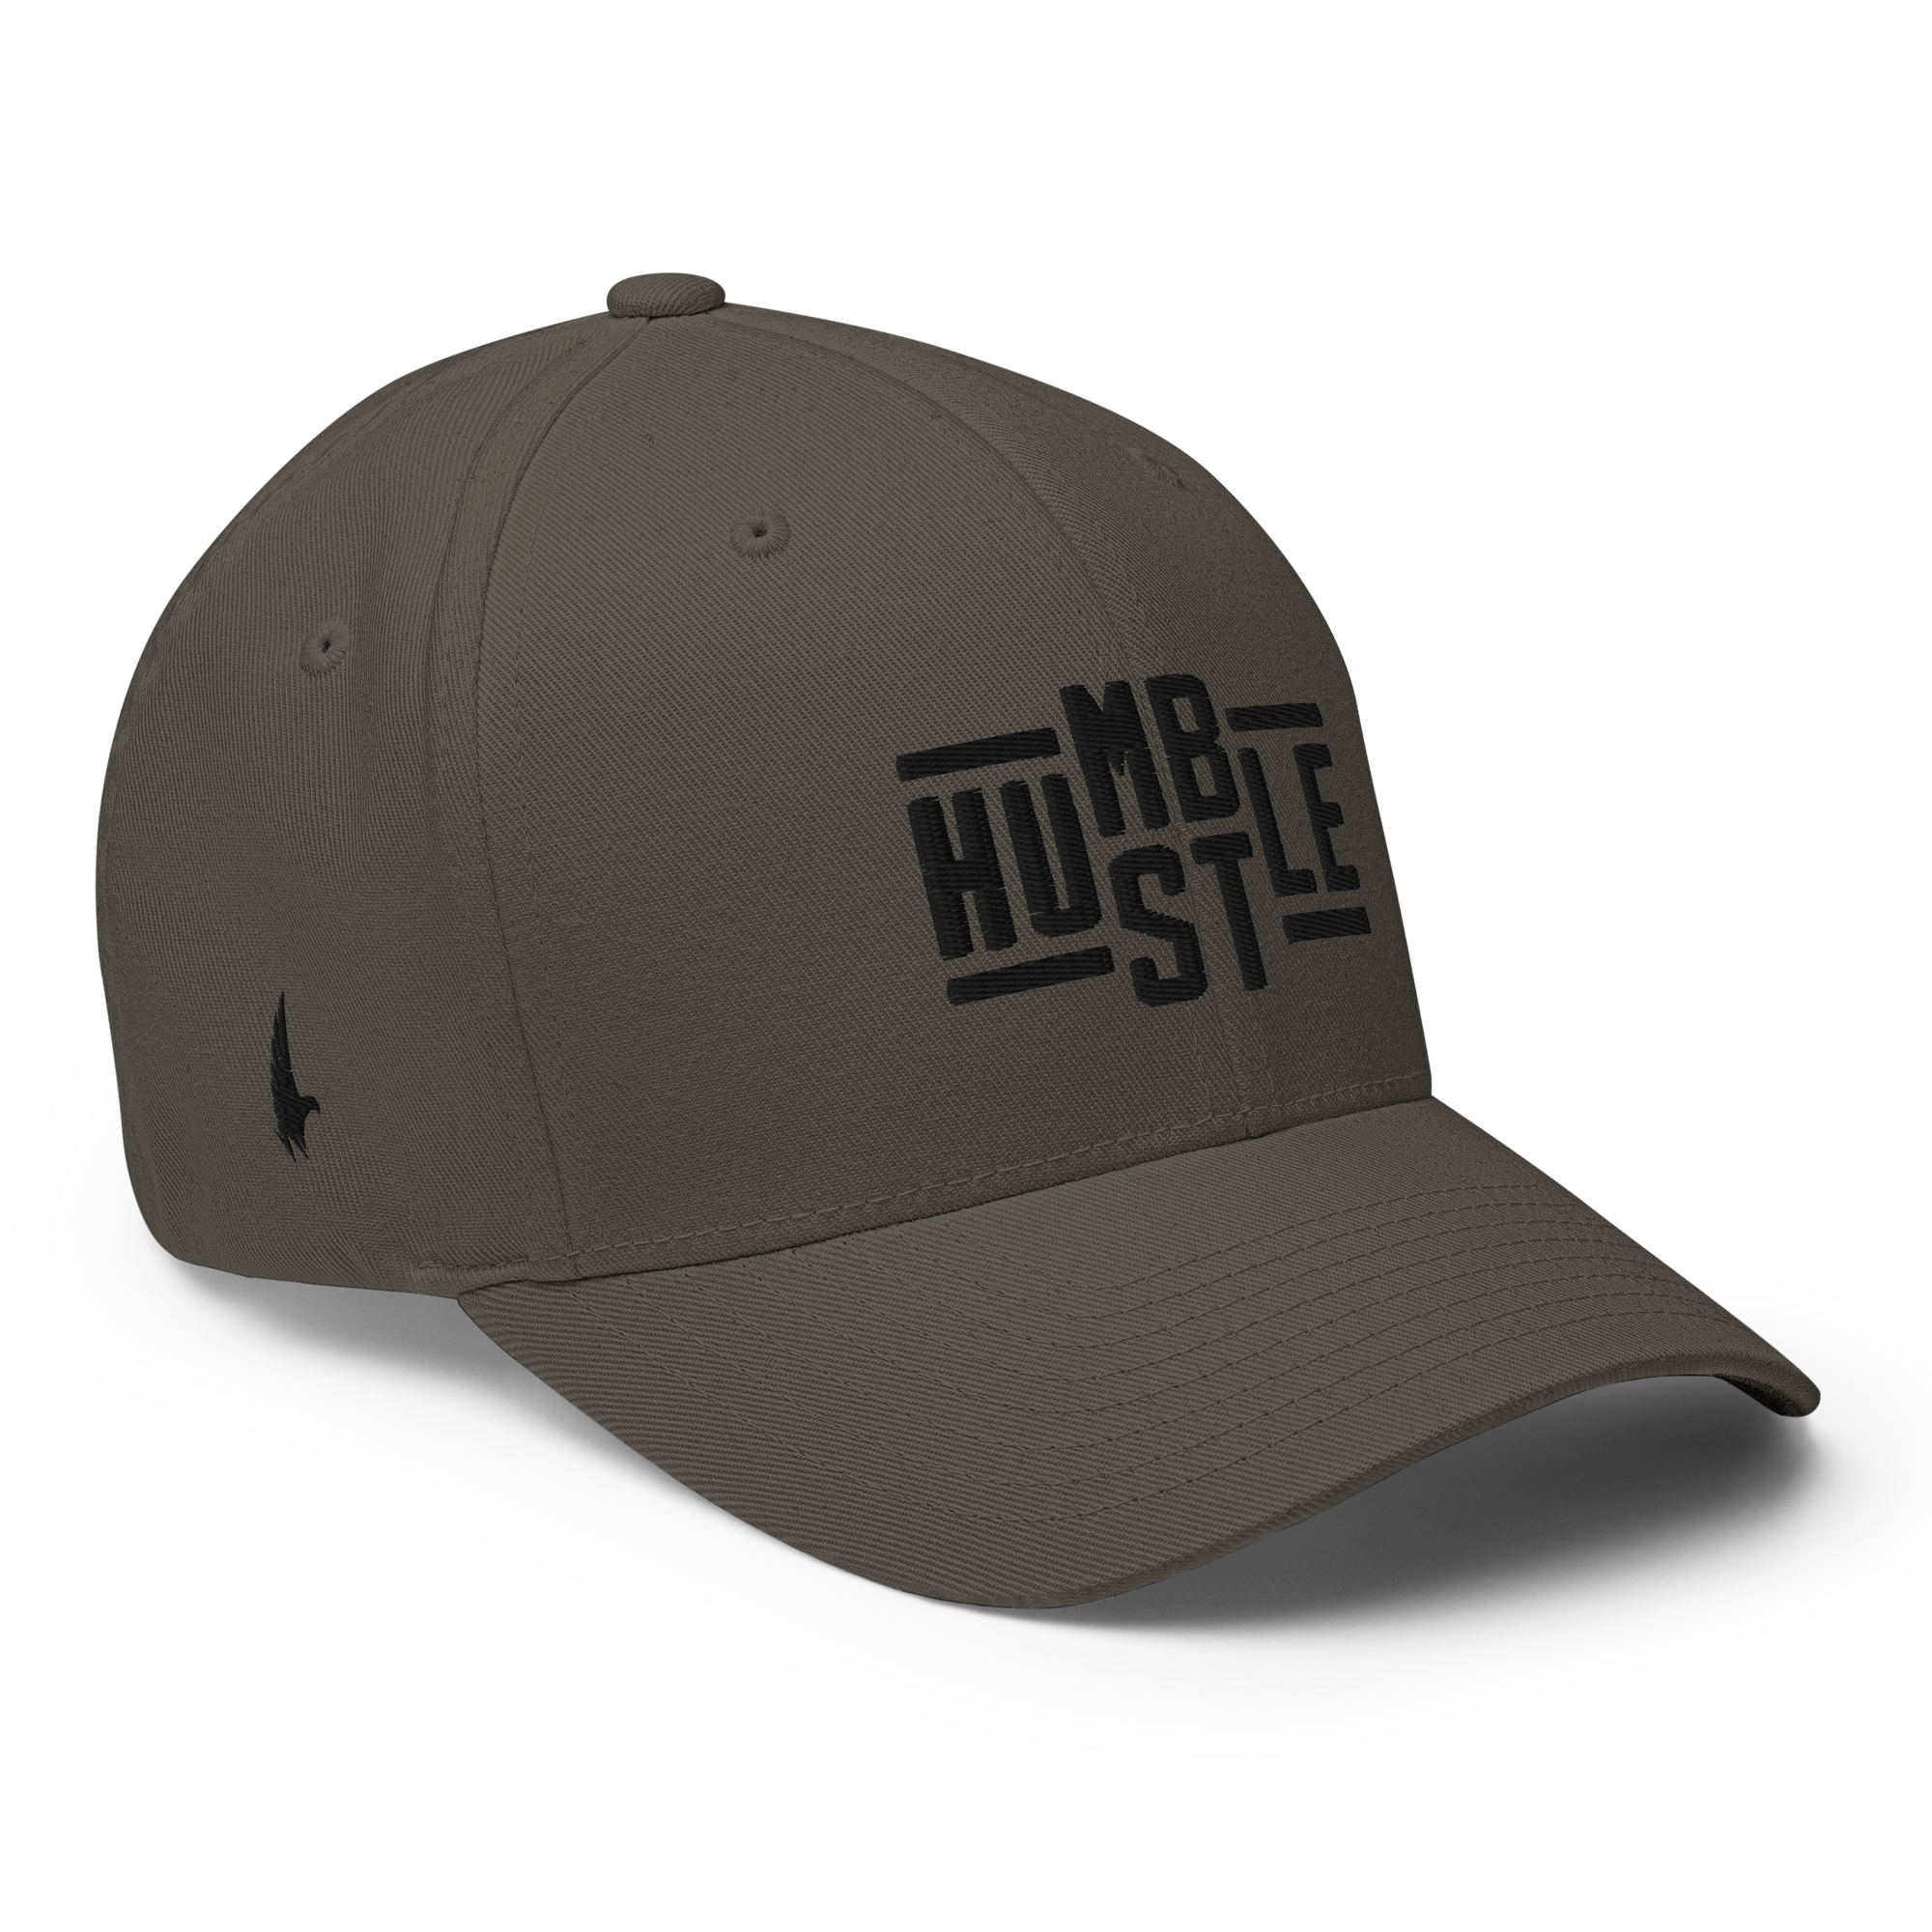 Loyalty Vibes Hustle Fitted Hat Charcoal Gray / Black Fitted - Loyalty Vibes